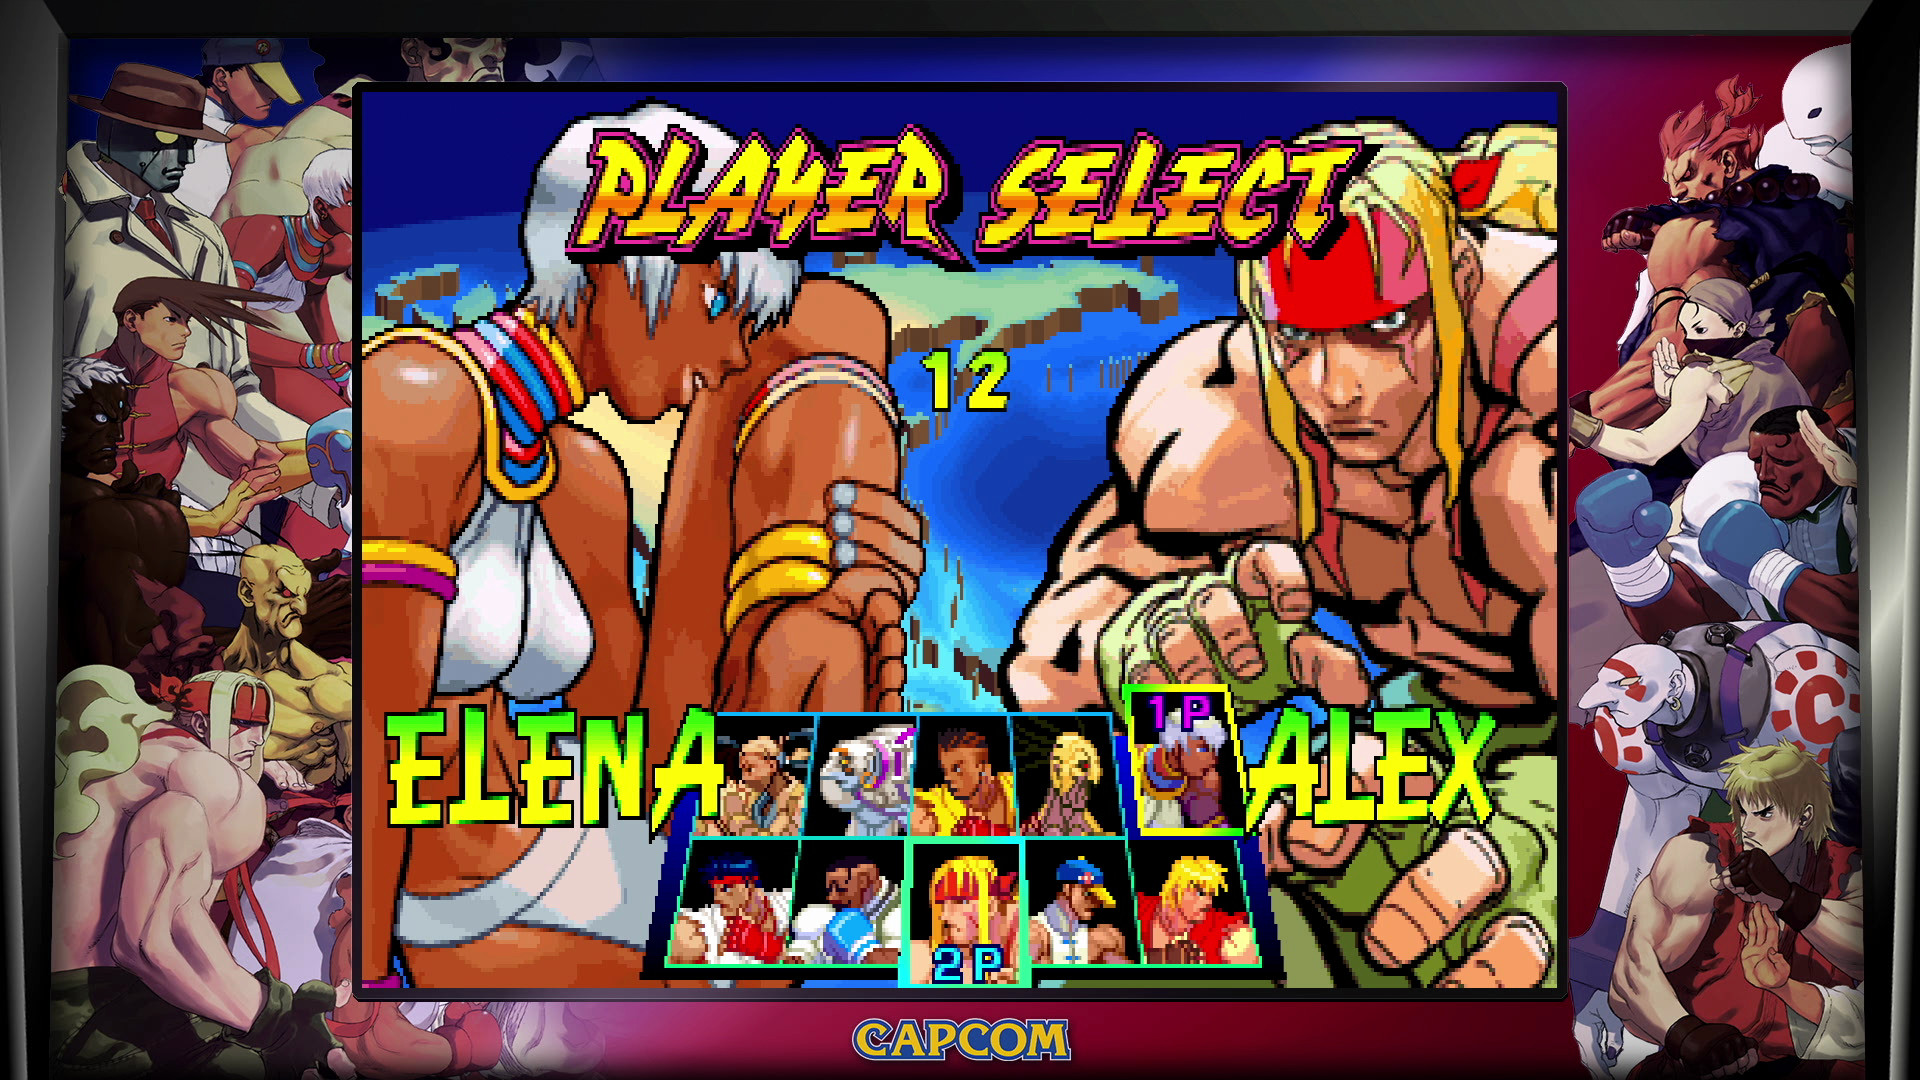 Buy Street Fighter 30th Anniversary Collection